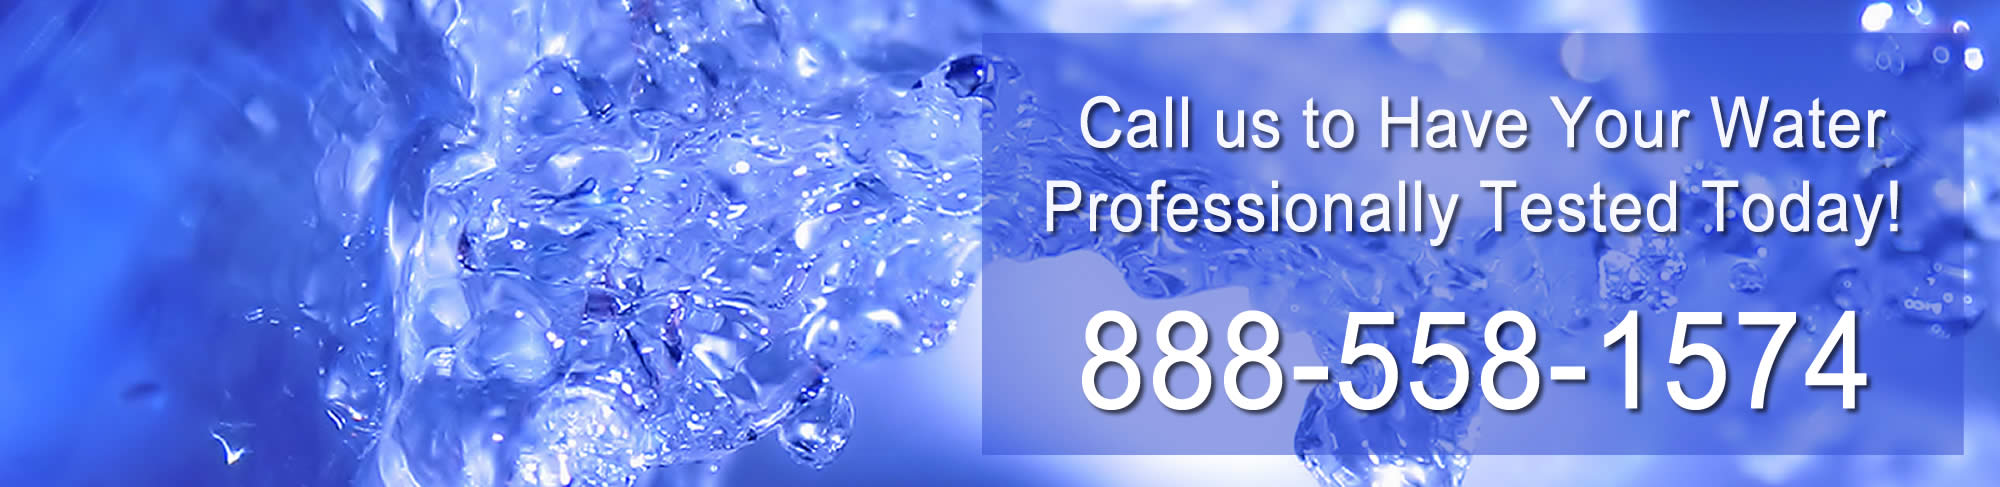 Specializing in Newington CT Water Testing and Analysis